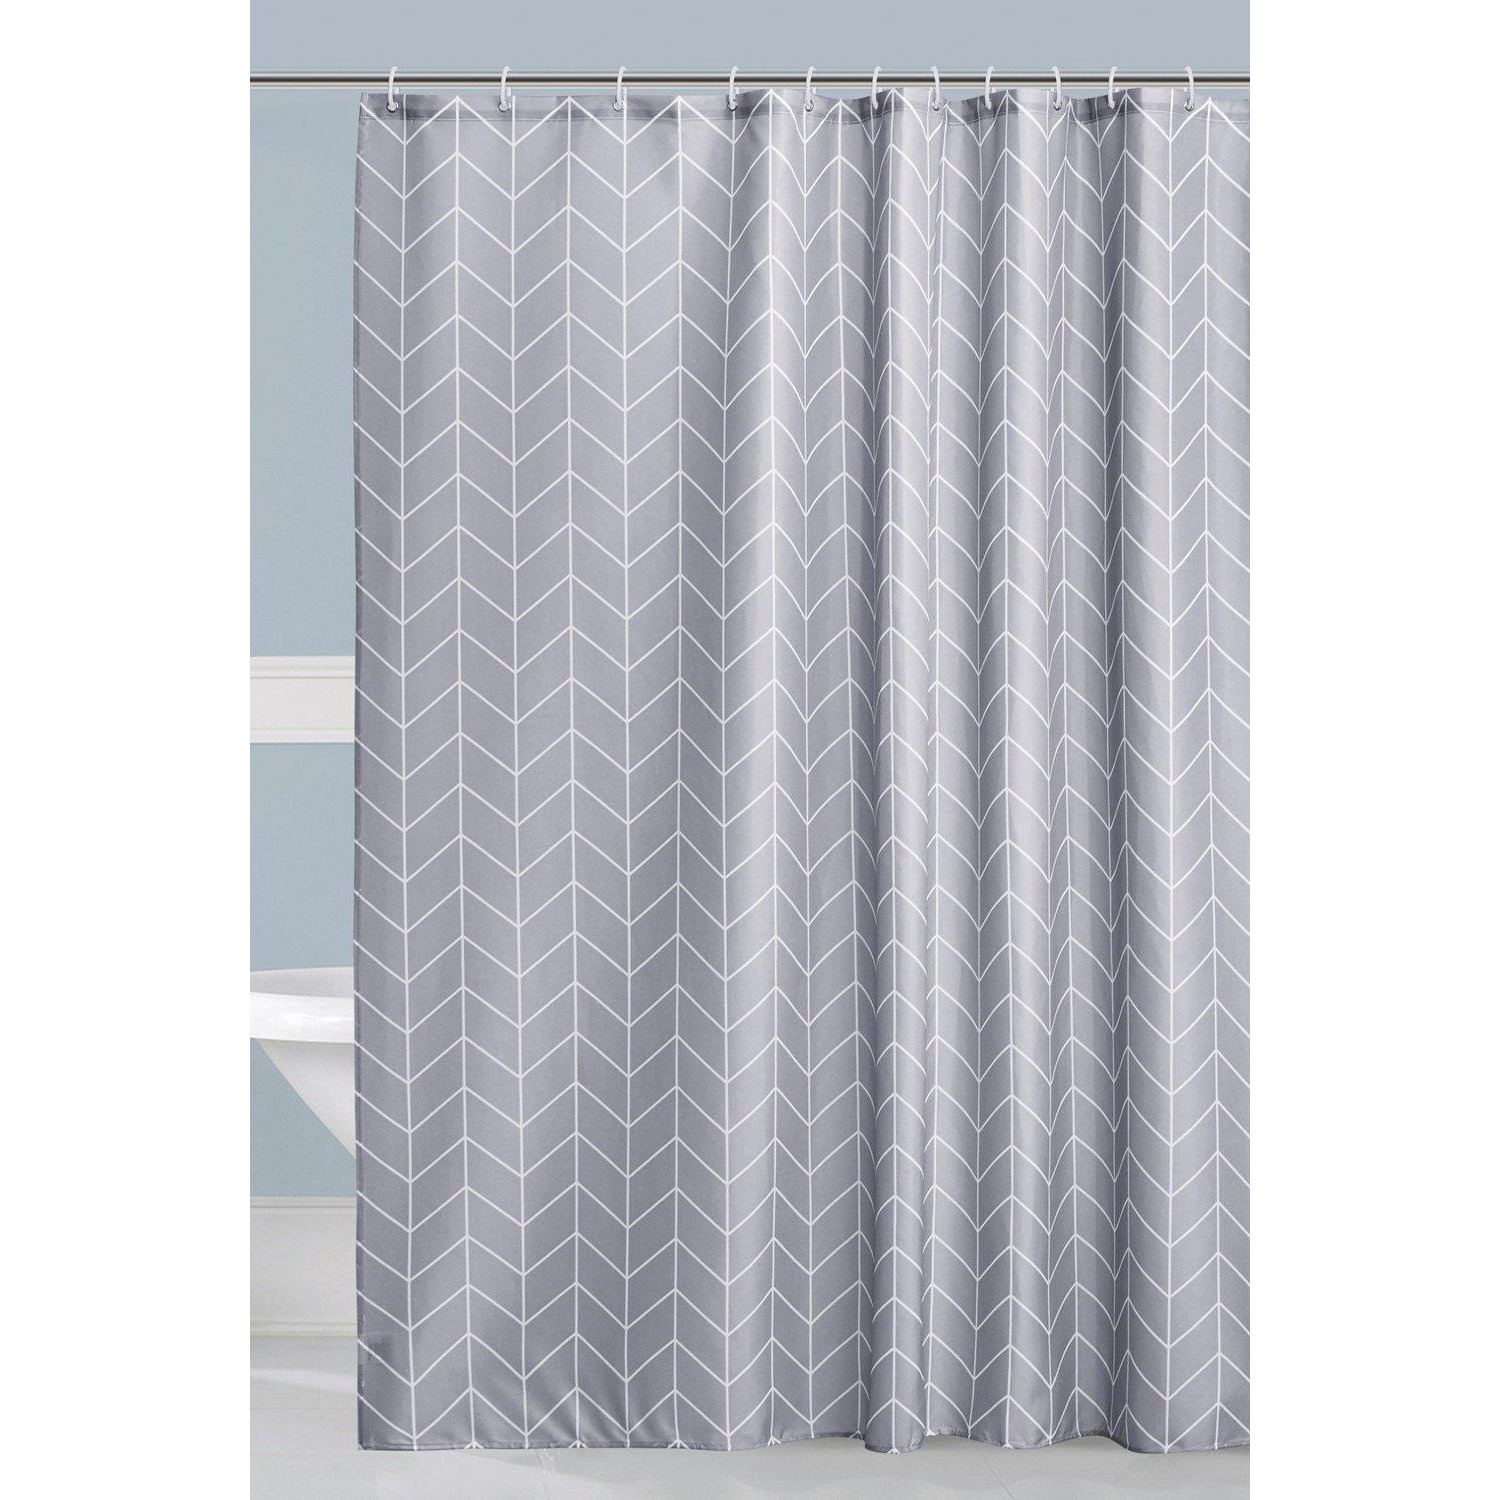 Geometric Lines Printed Polyester Shower Curtain - Grey - image 1